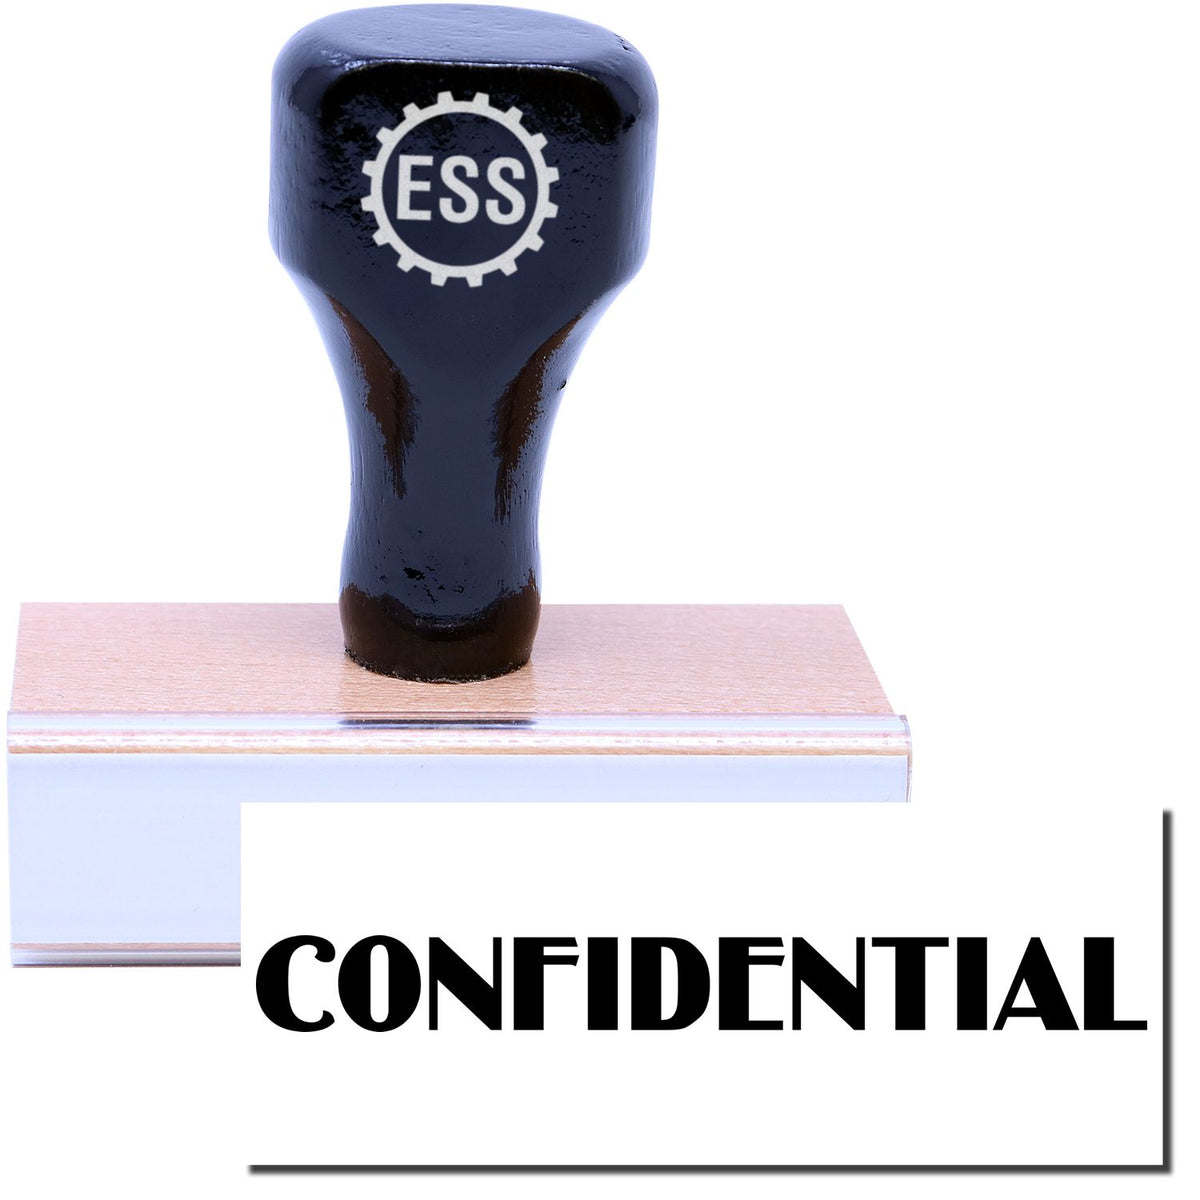 A stock office rubber stamp with a stamped image showing how the text &quot;CONFIDENTIAL&quot; in a large optima font is displayed after stamping.